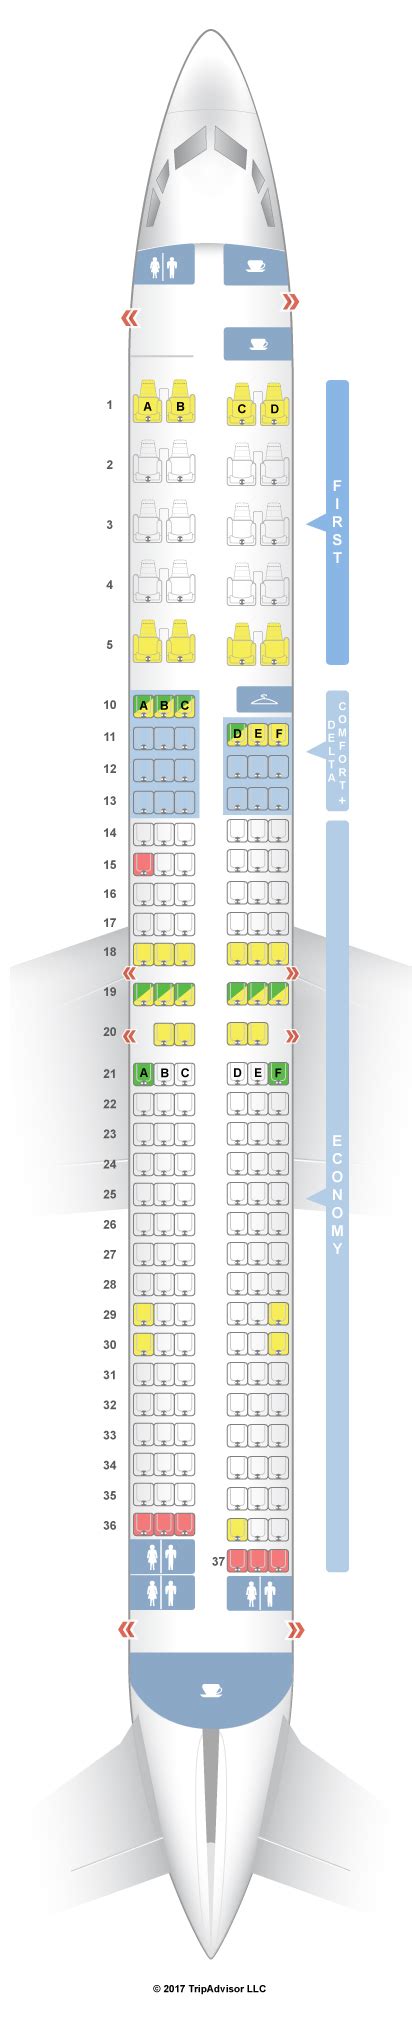 737 900 seat guru. Read user reviews for United Boeing 777-200 (772) Layout 5. Submitted by SeatGuru User on 2020/02/04 for Seat 7D. Avoid any middle row seats in aisles 7 and 8. There is a ceiling vent that blasts cold air from the galley above these two rows and the crew cannot turn it off. I was freezing during an 11 hour flight. 